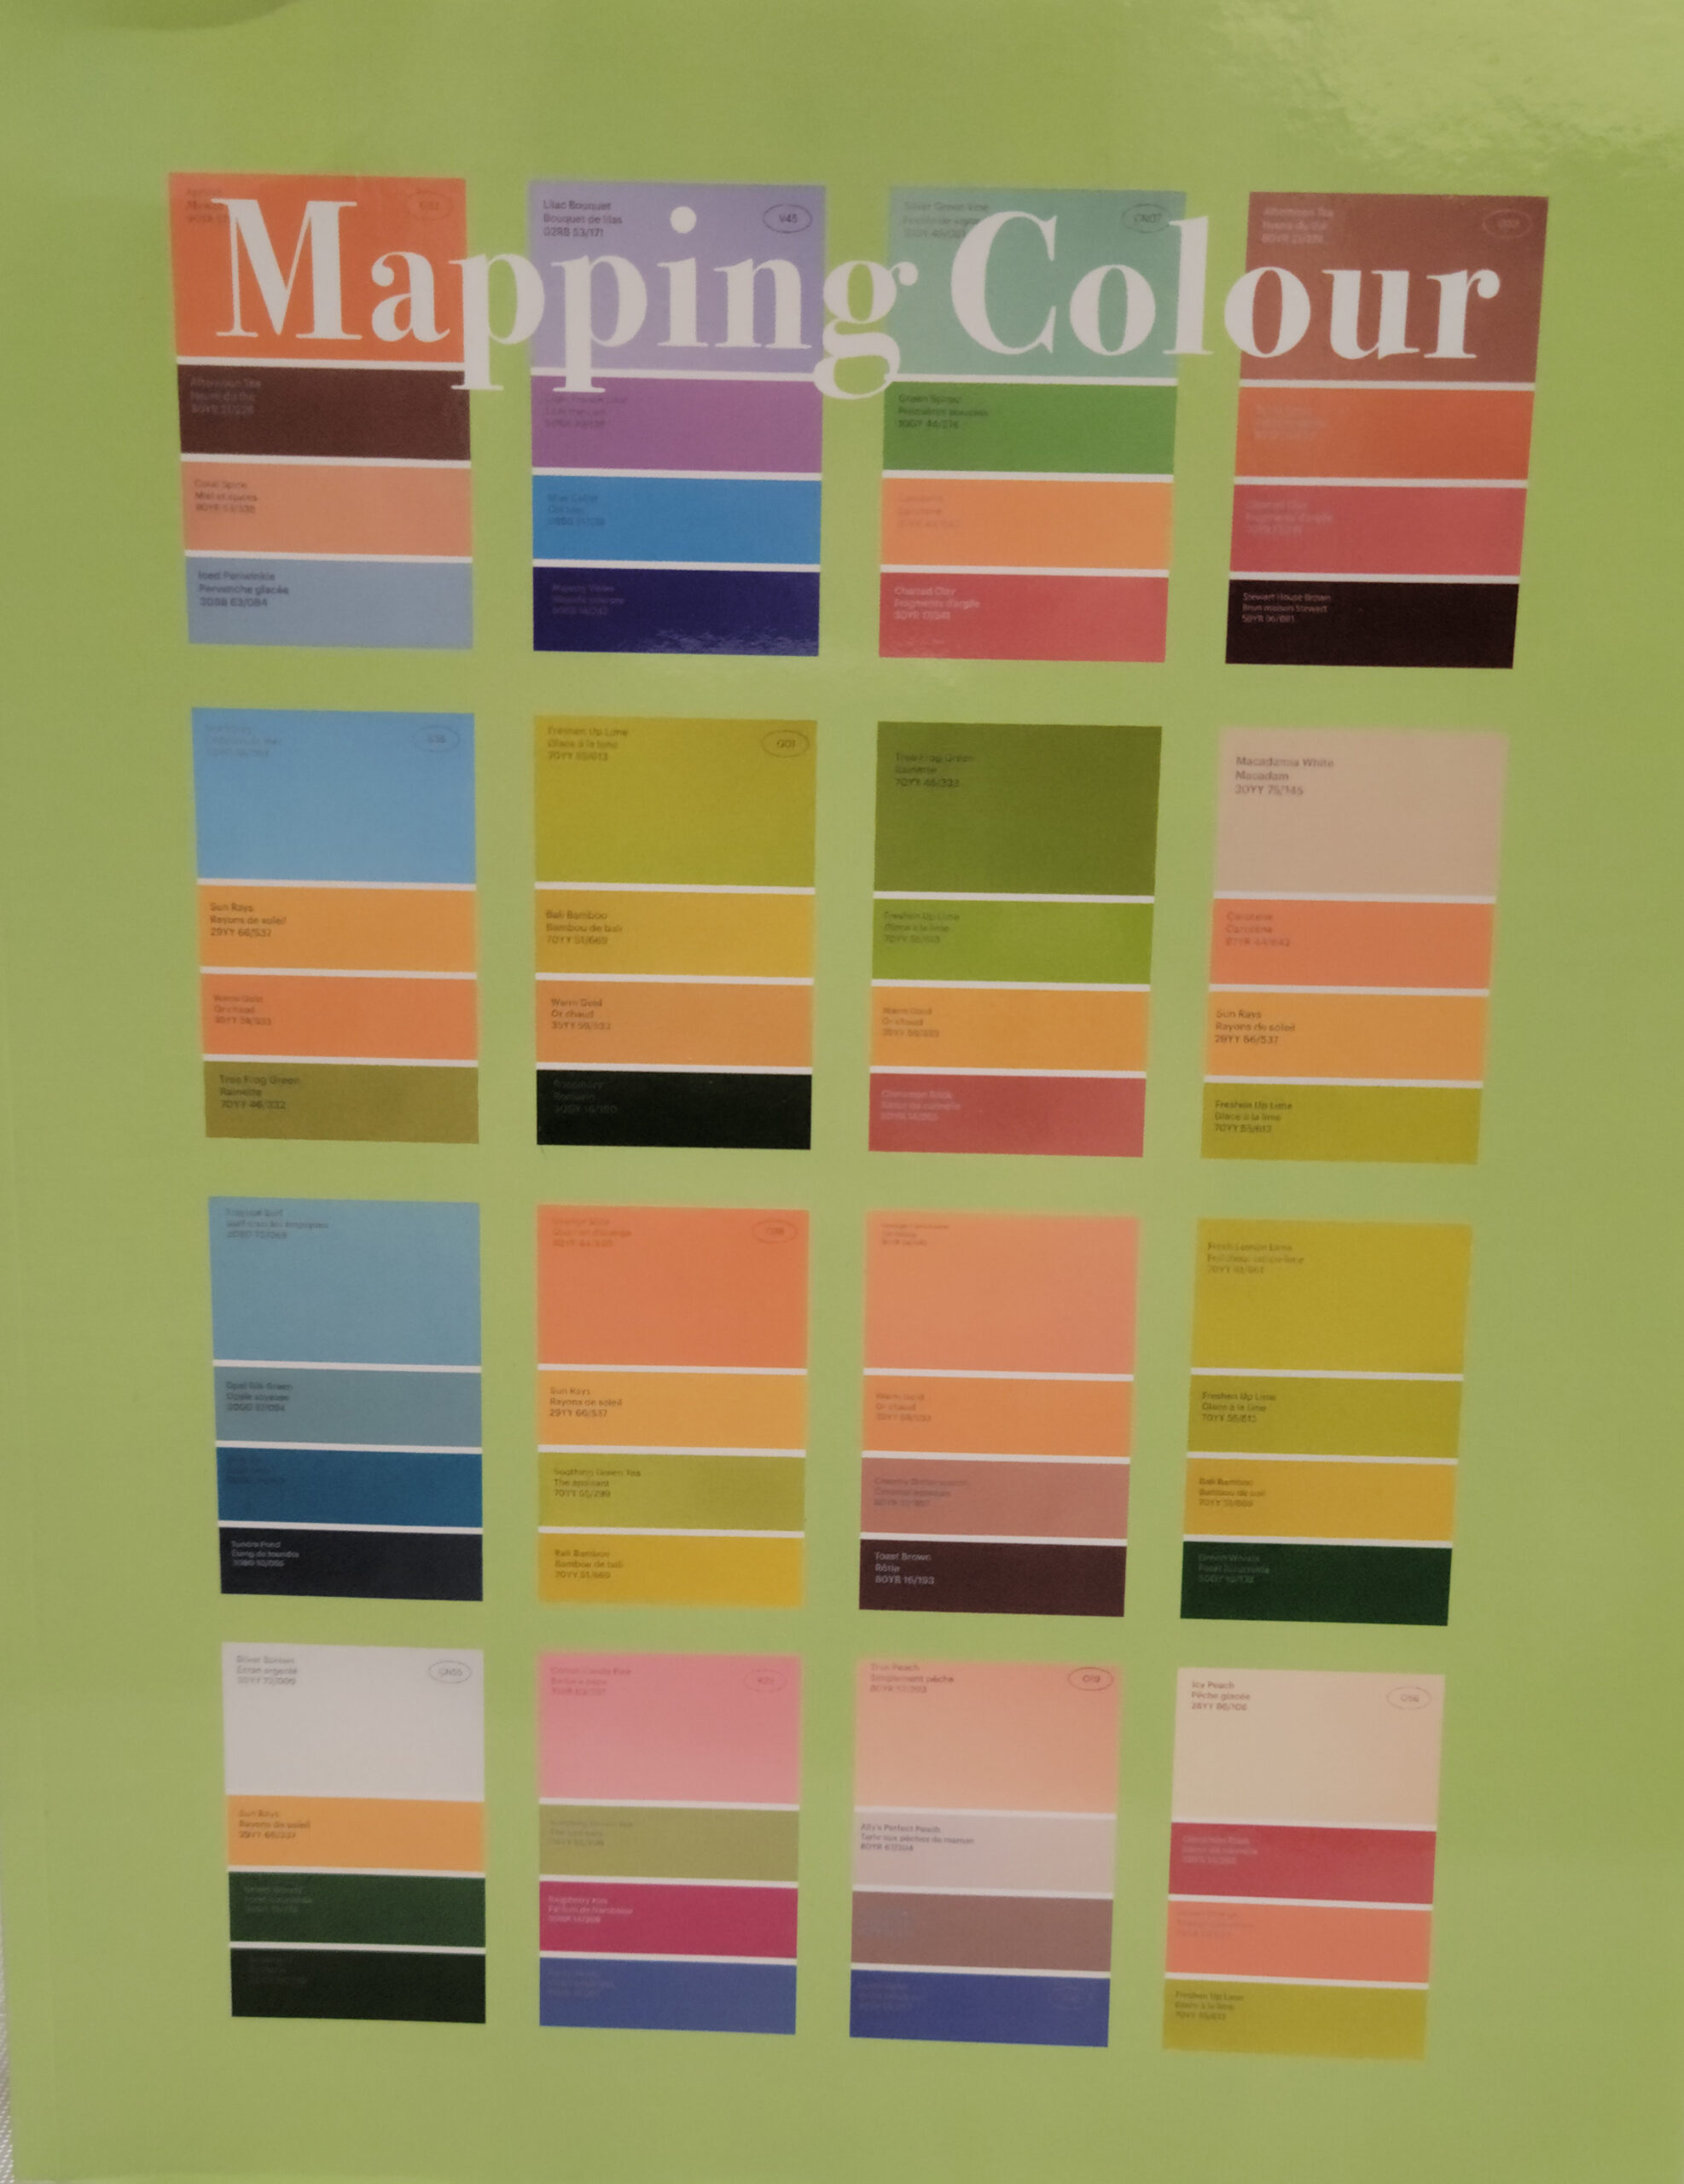 Photograph of front cover of book Mapping Colour by Abygail De Leon